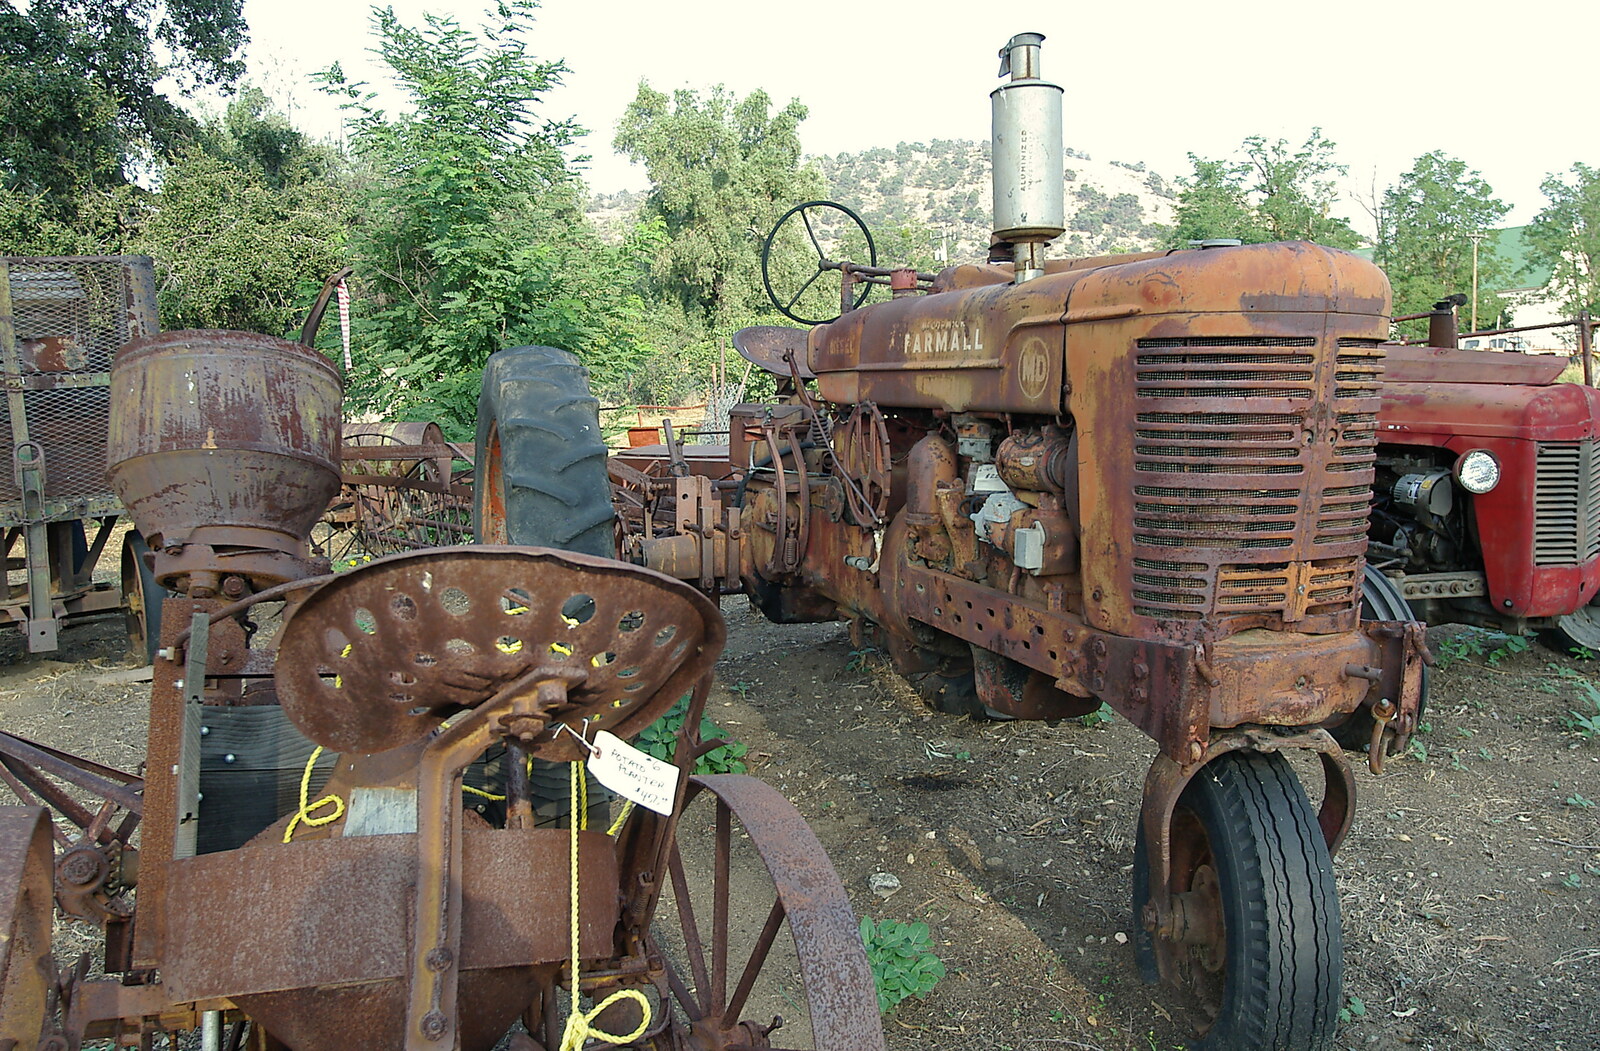 Rusting farm machinery, with a Farmall tractor from Route 78: A Drive Around the San Diego Mountains, California, US - 9th August 2005